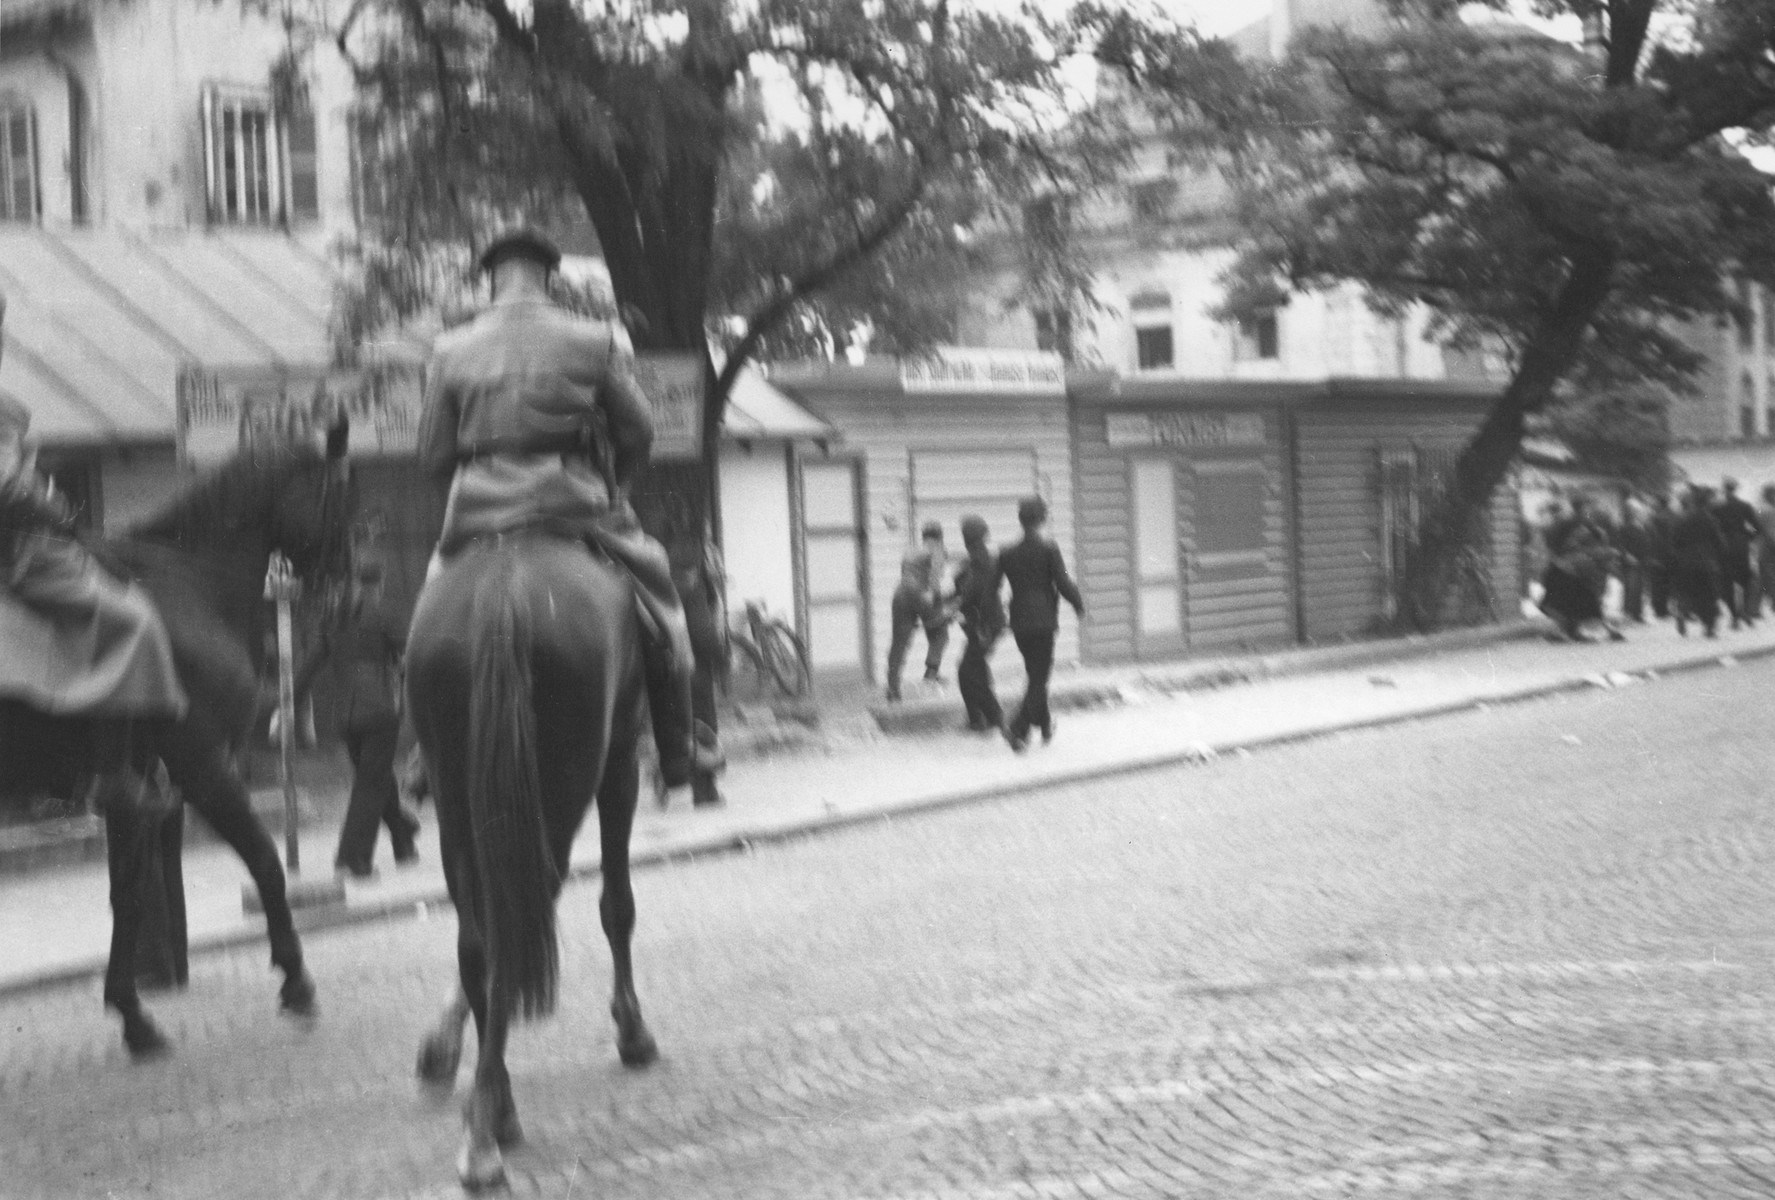 German police on horseback conduct a raid to suppress Jewish black market activity on the Moehlstrasse in Munich.